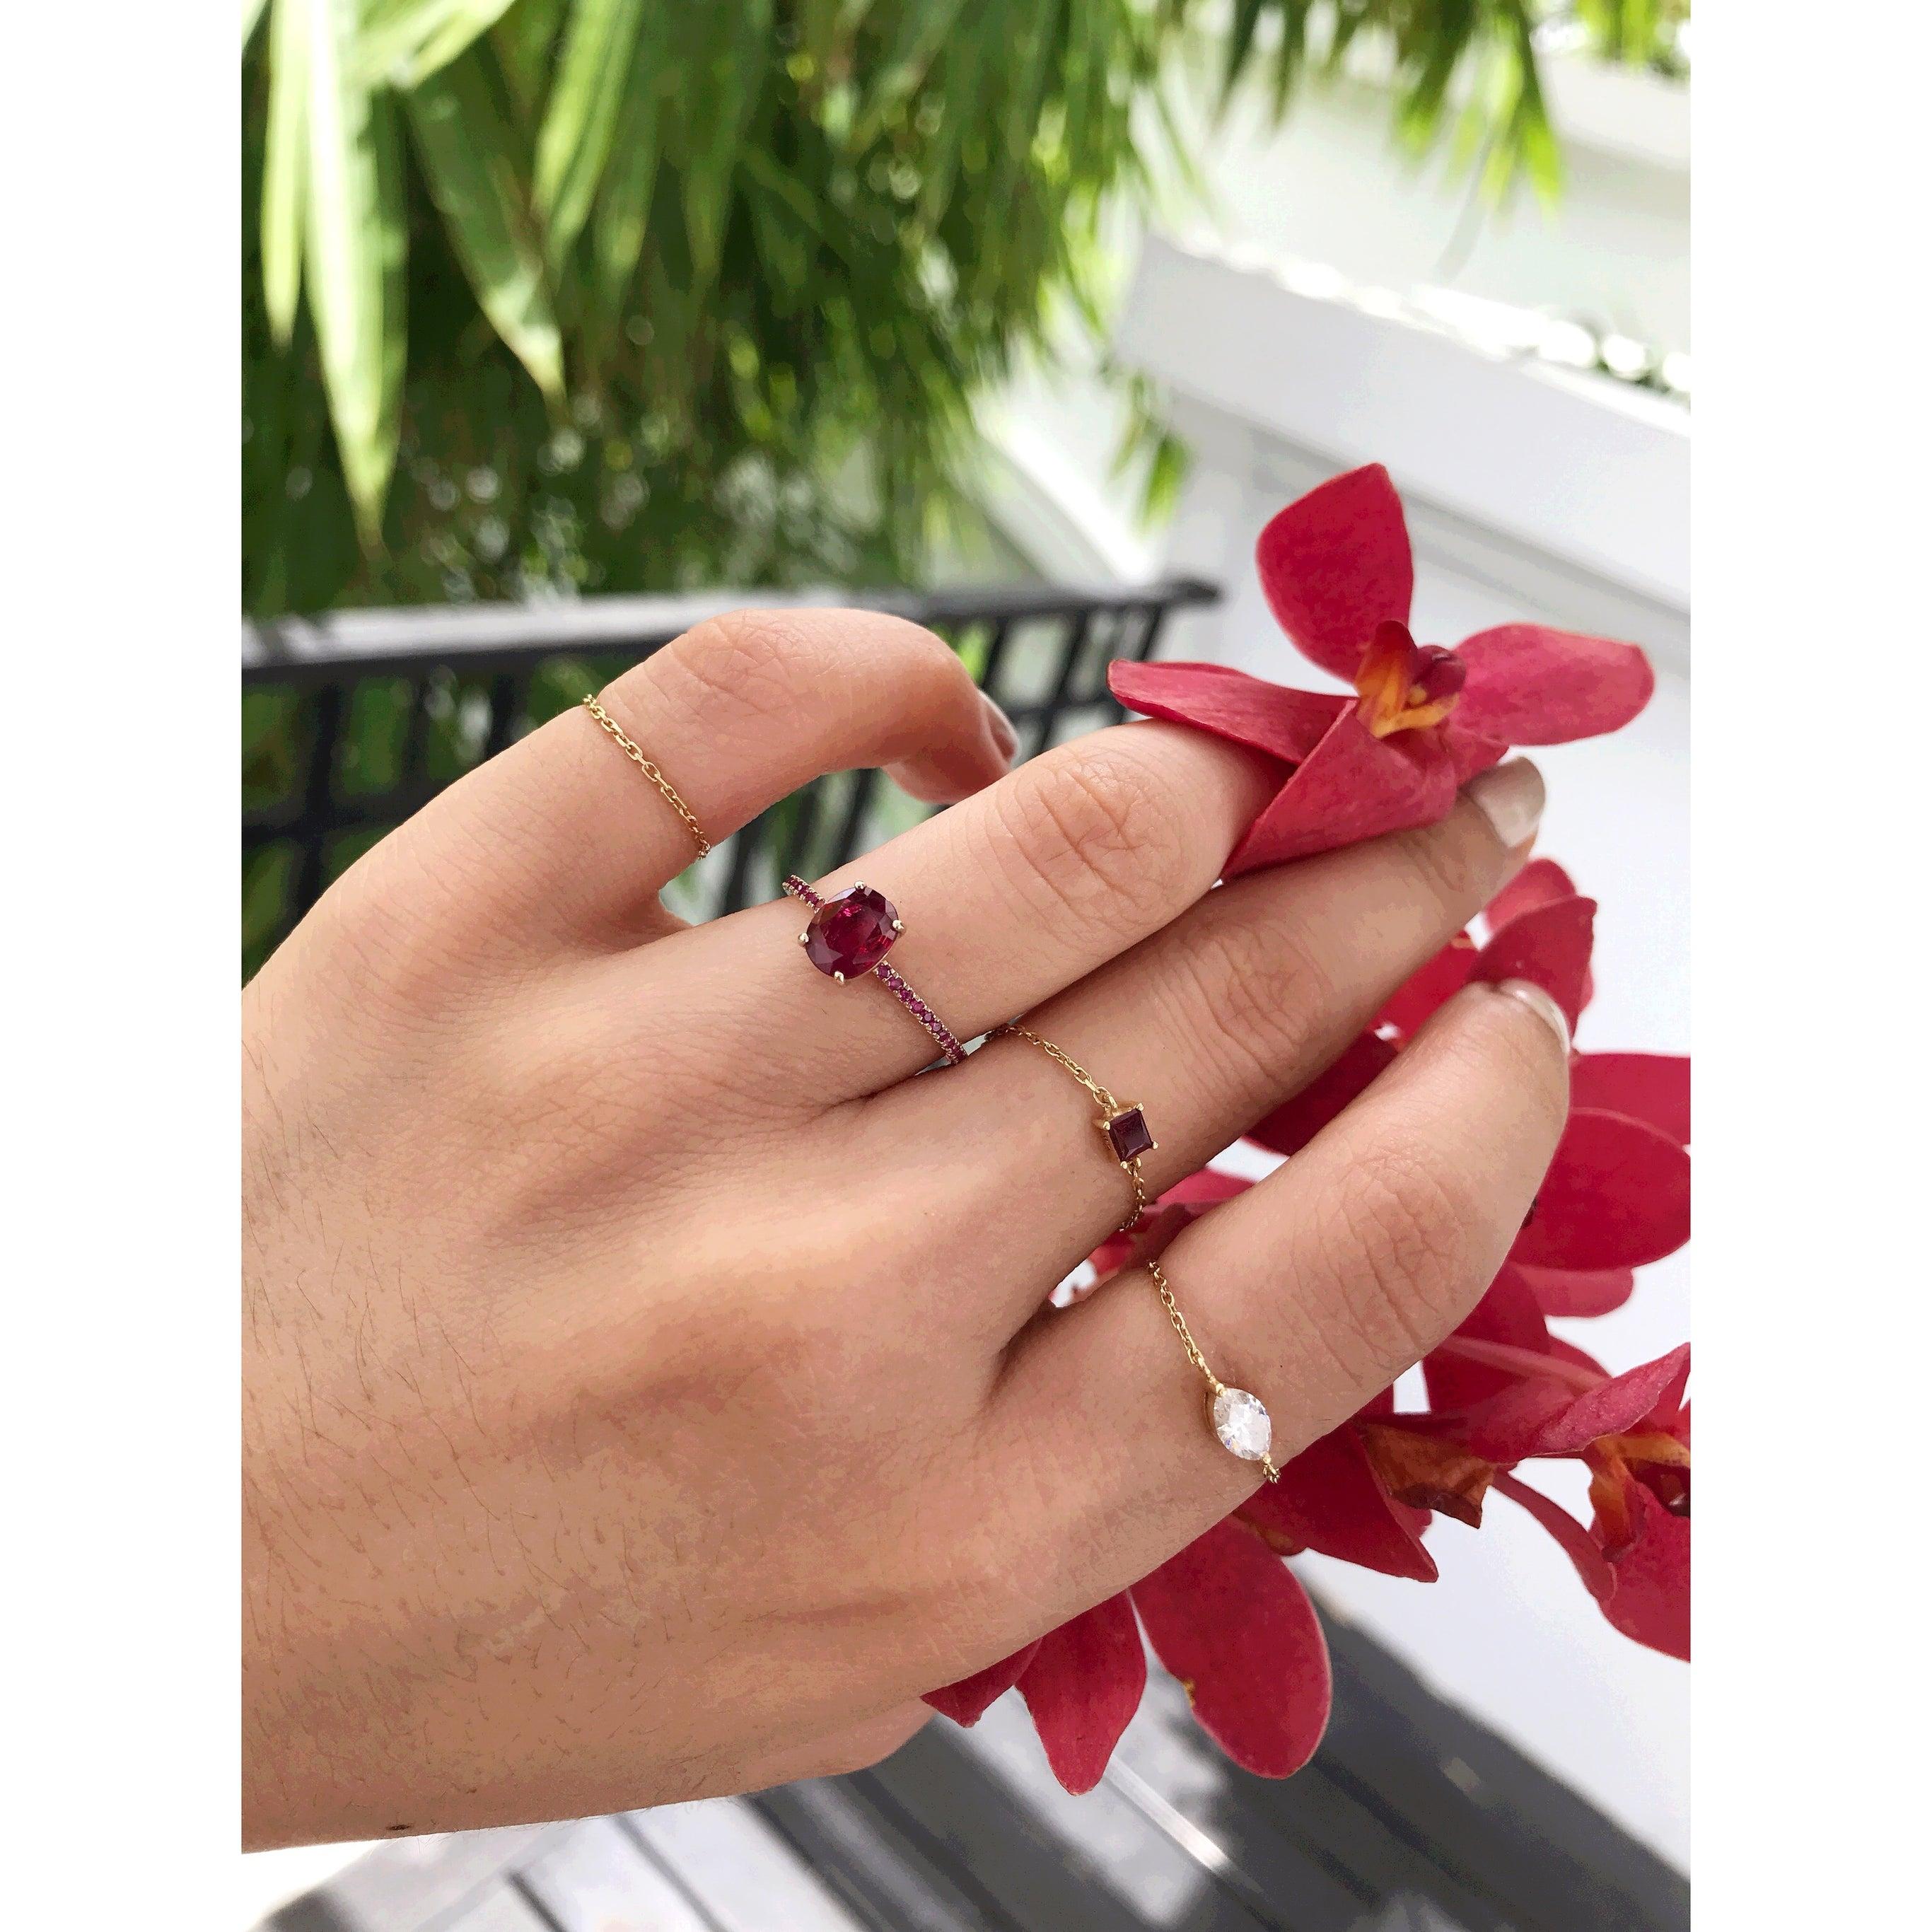 This stunning oval ruby is paired with a micro pave ruby band. It’s fire, clarity and color are really just the best example of why rubies are considered the king of all colored gemstones.

This simple design exudes a modern effortless edge. The